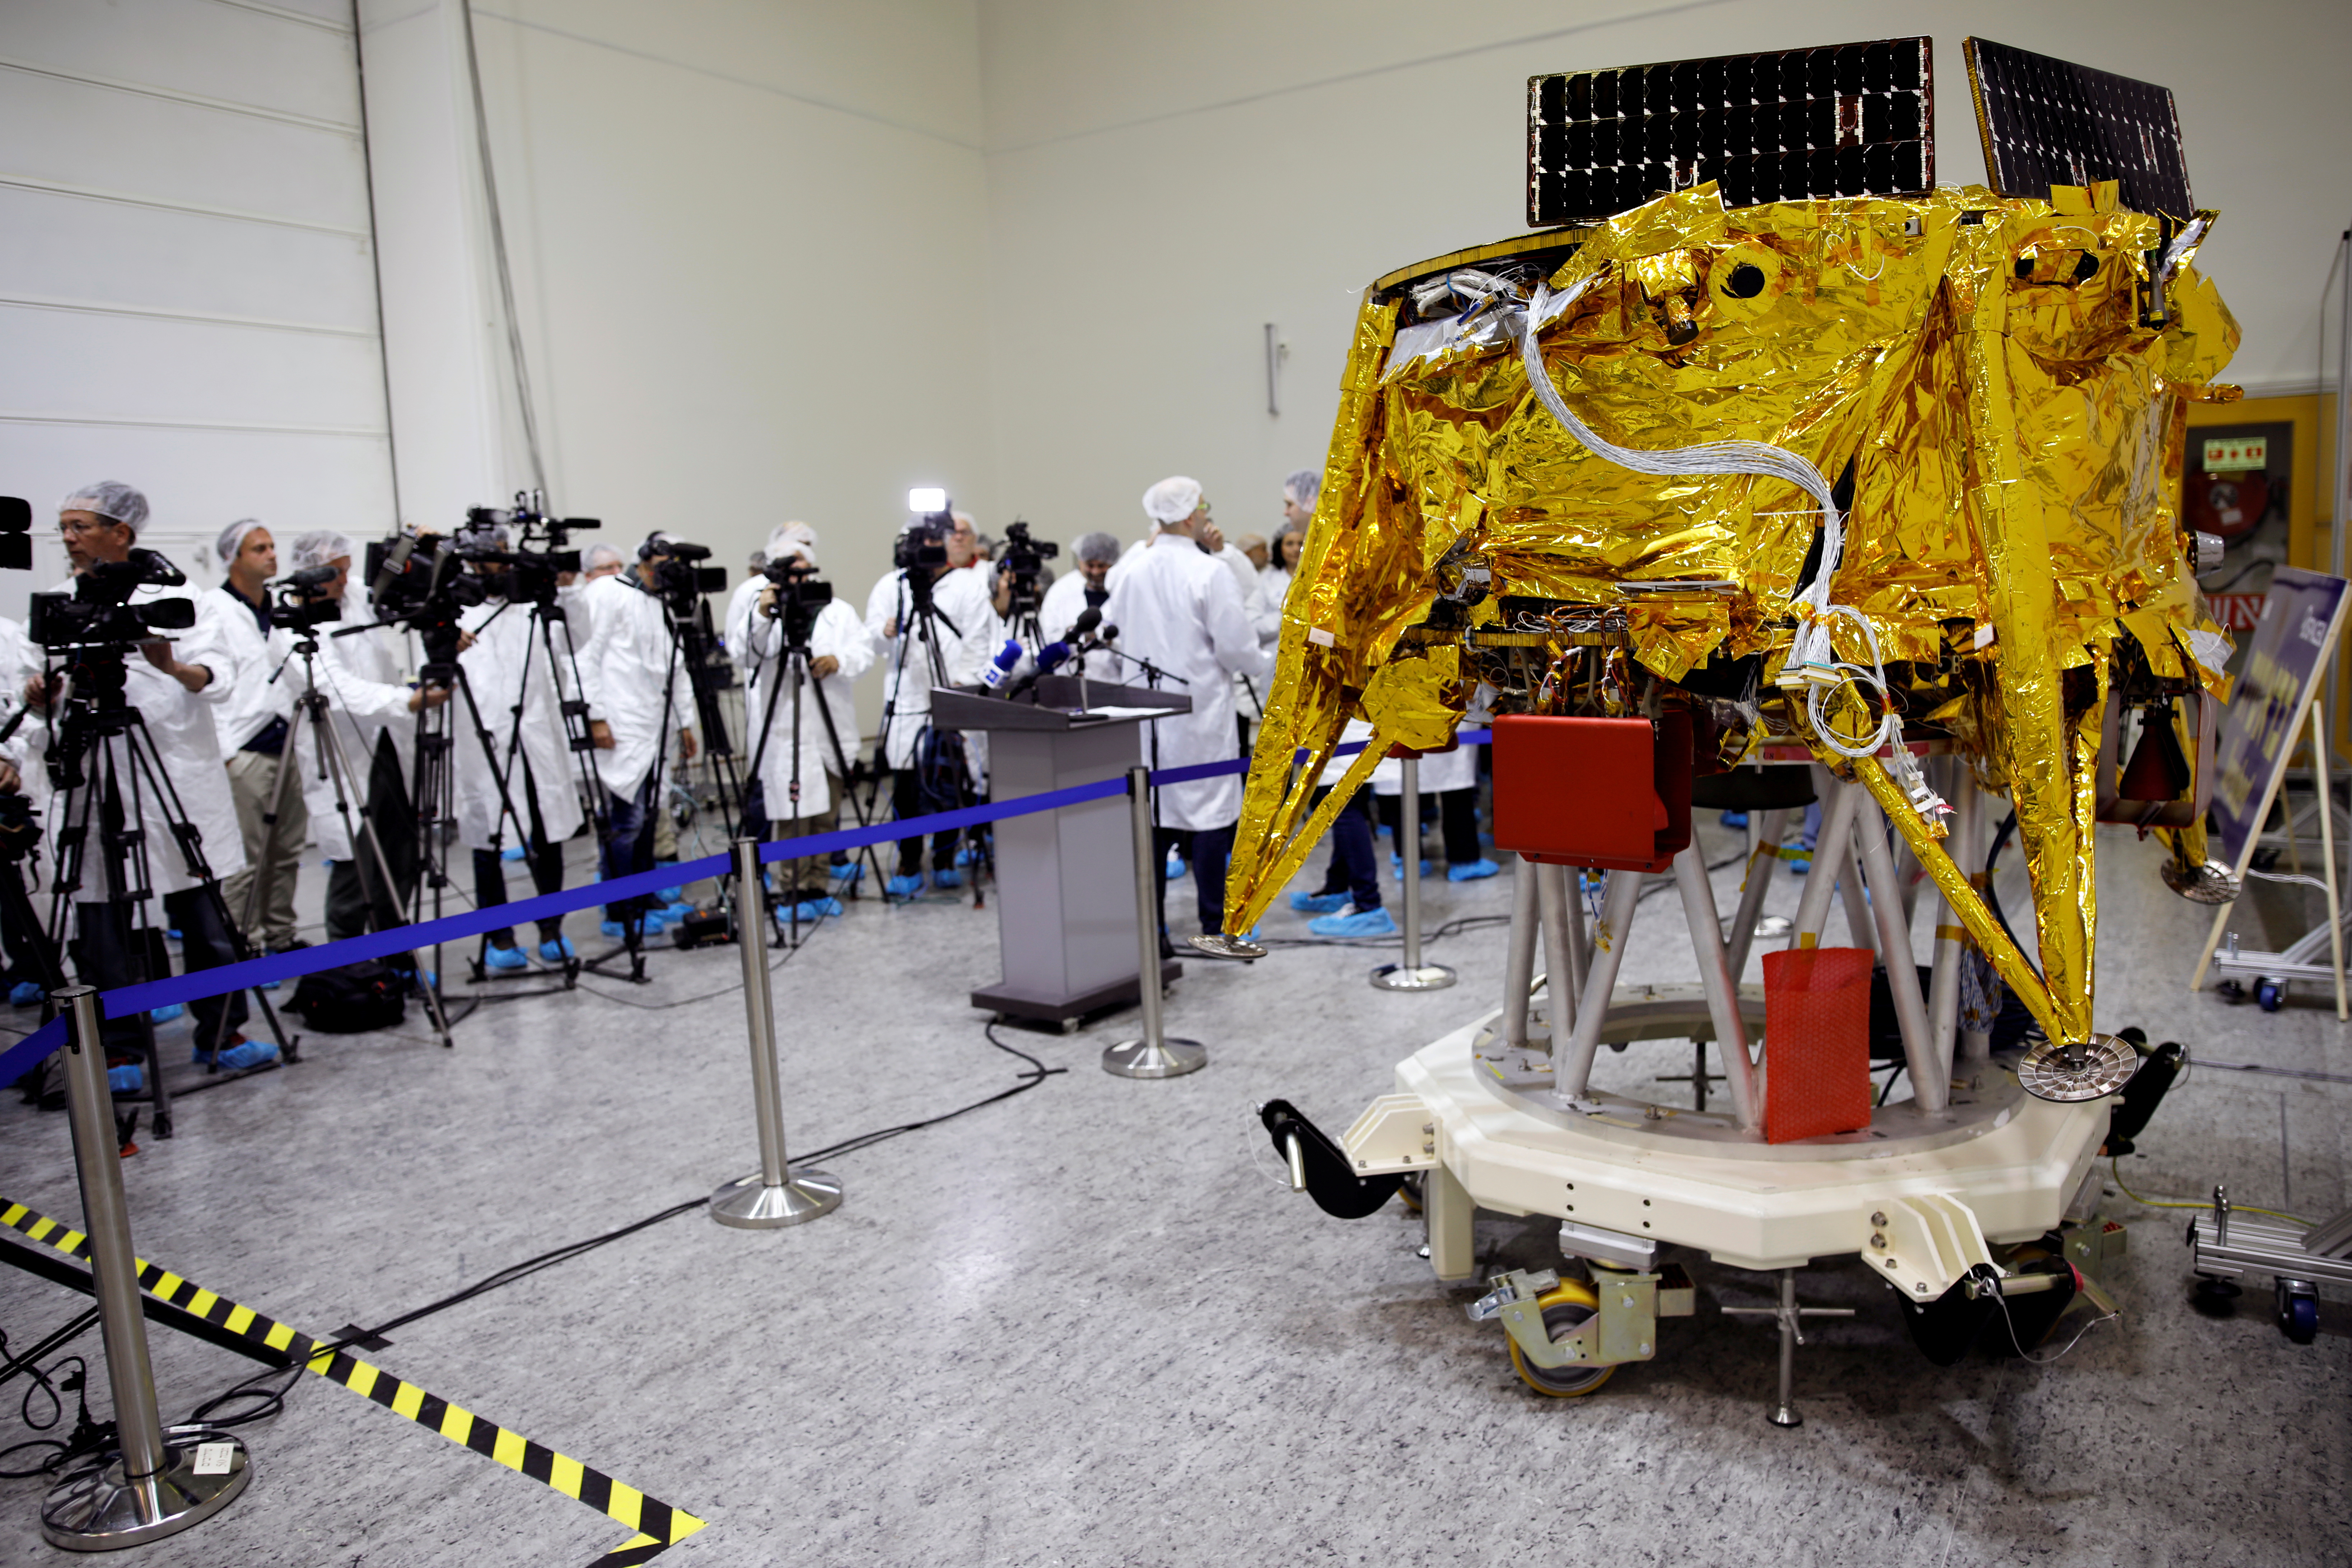 An unmanned spacecraft is seen during a presentation to the media by members of Israeli non-profit group SpaceIL and representatives from Israel Aerospace Industries (IAI), at the clean room of IAI's space division in Yehud, Israel